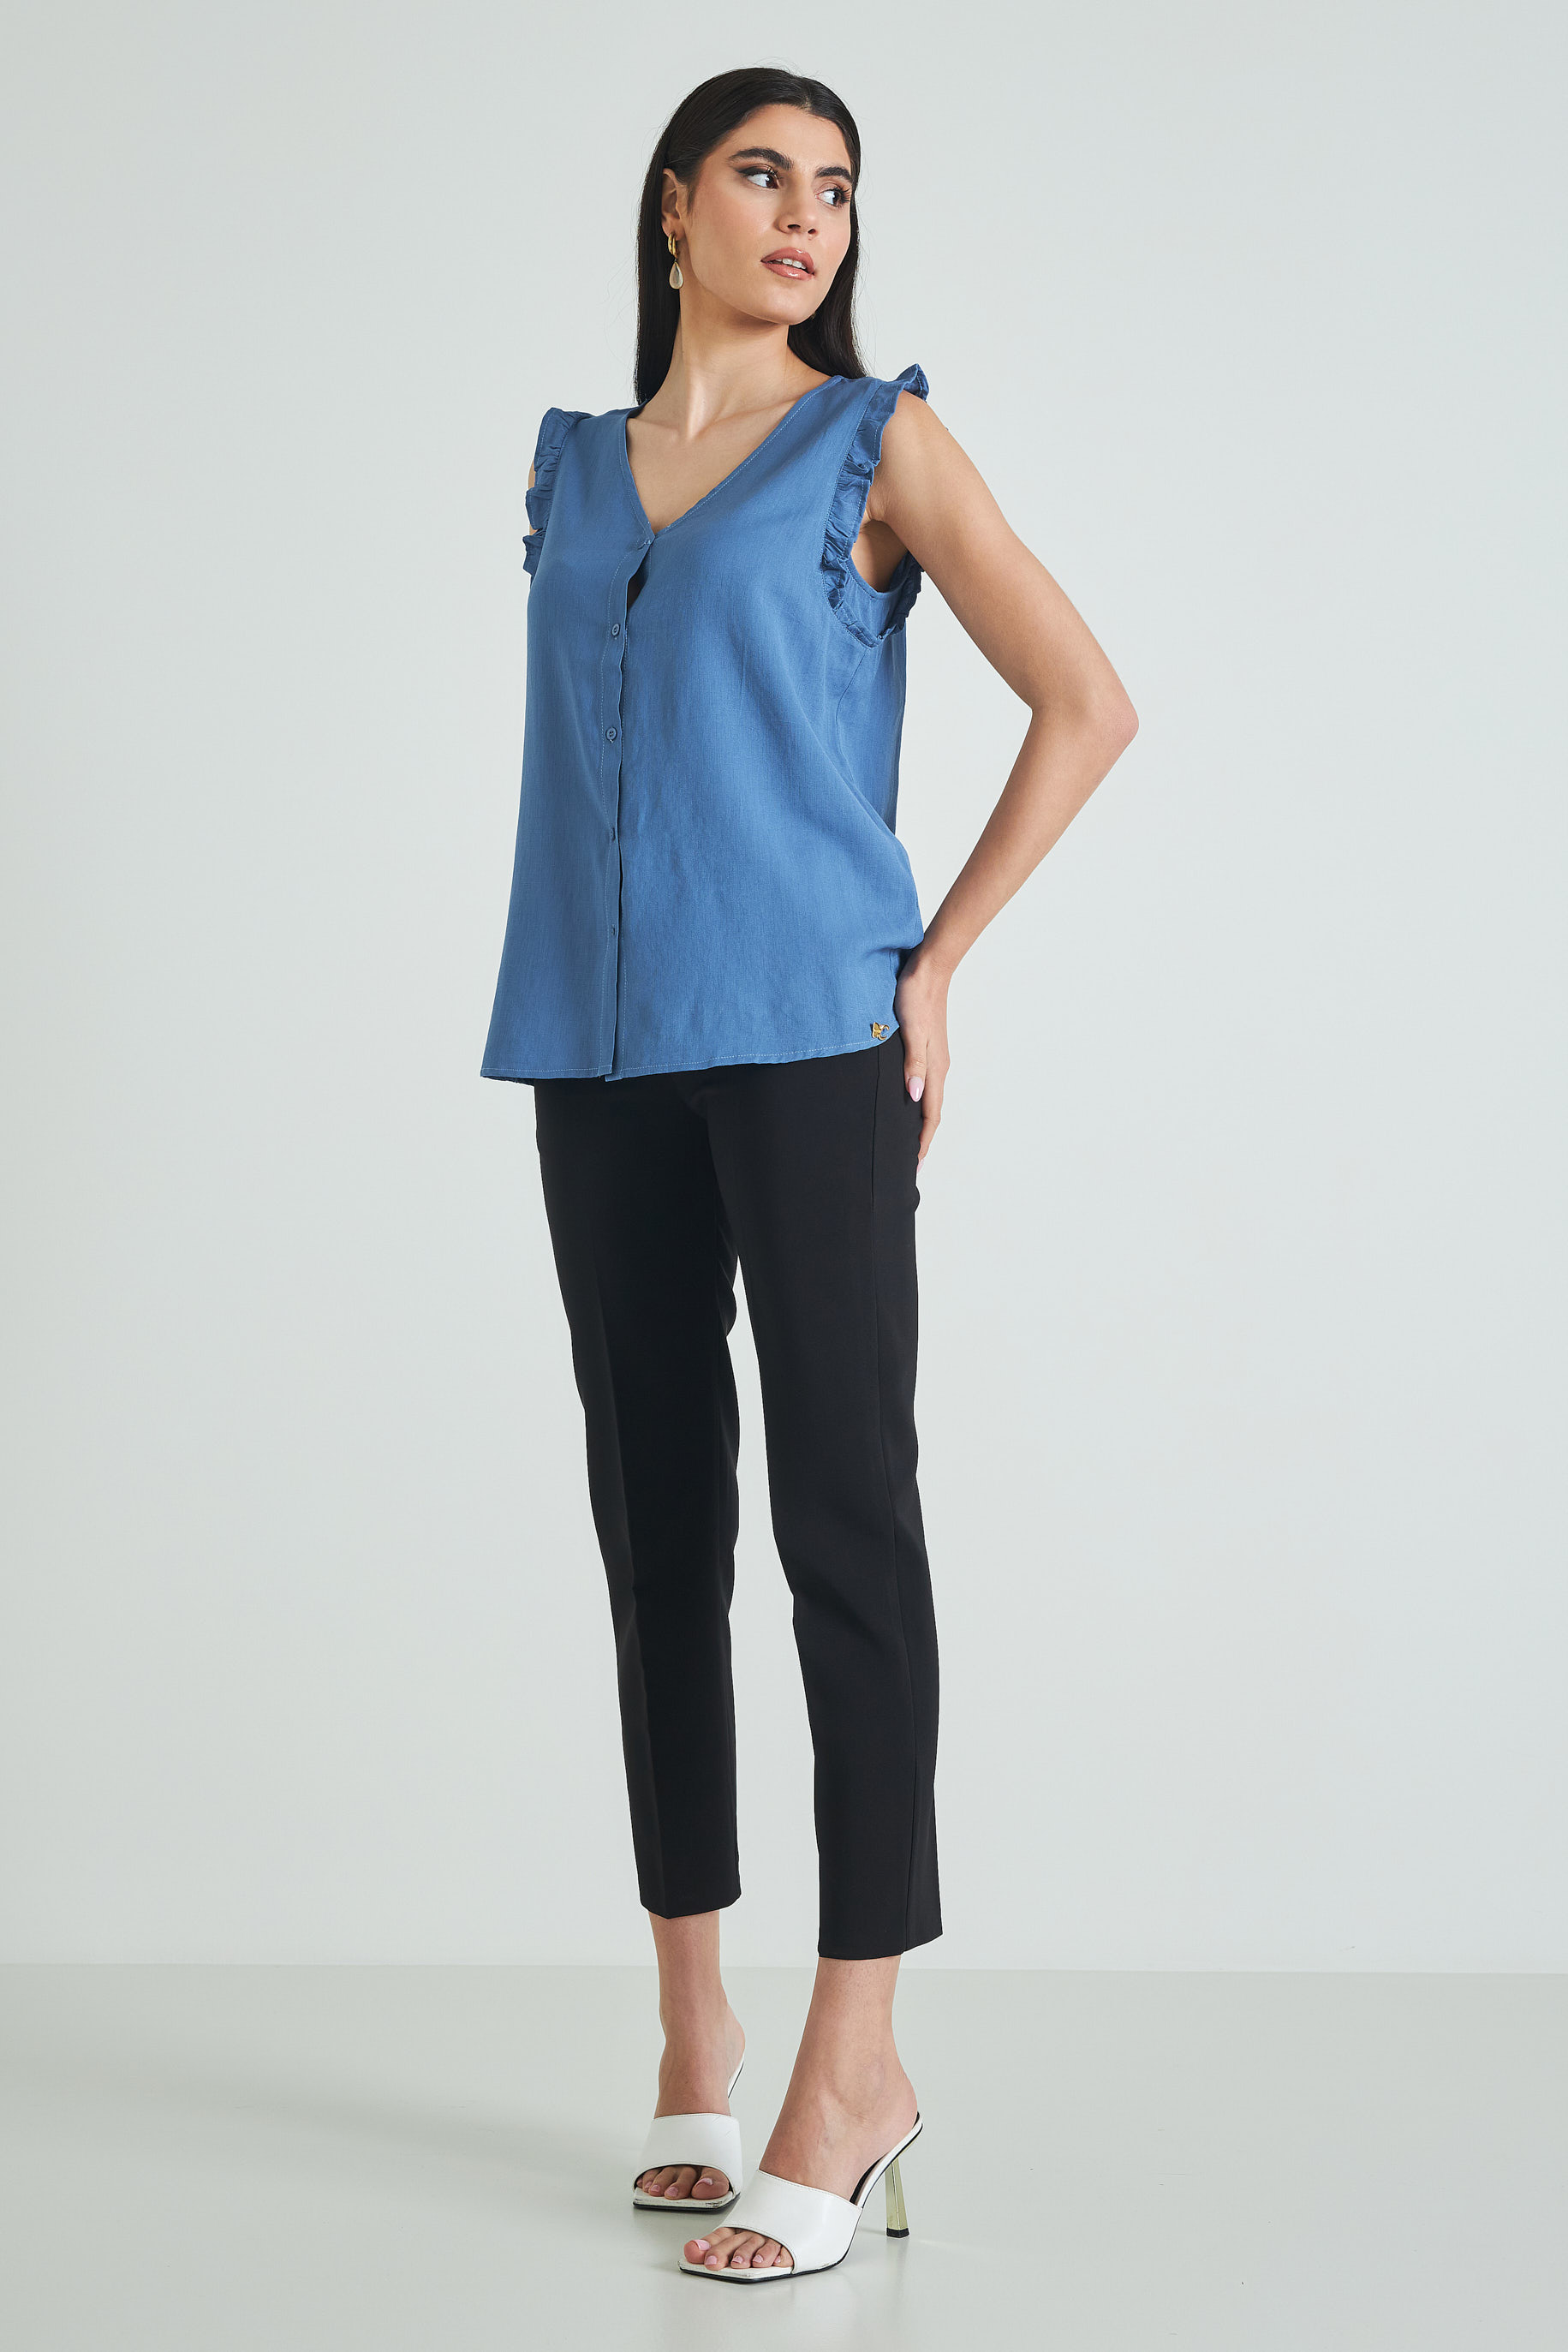 Picture of Sleeveless blouse with buttons